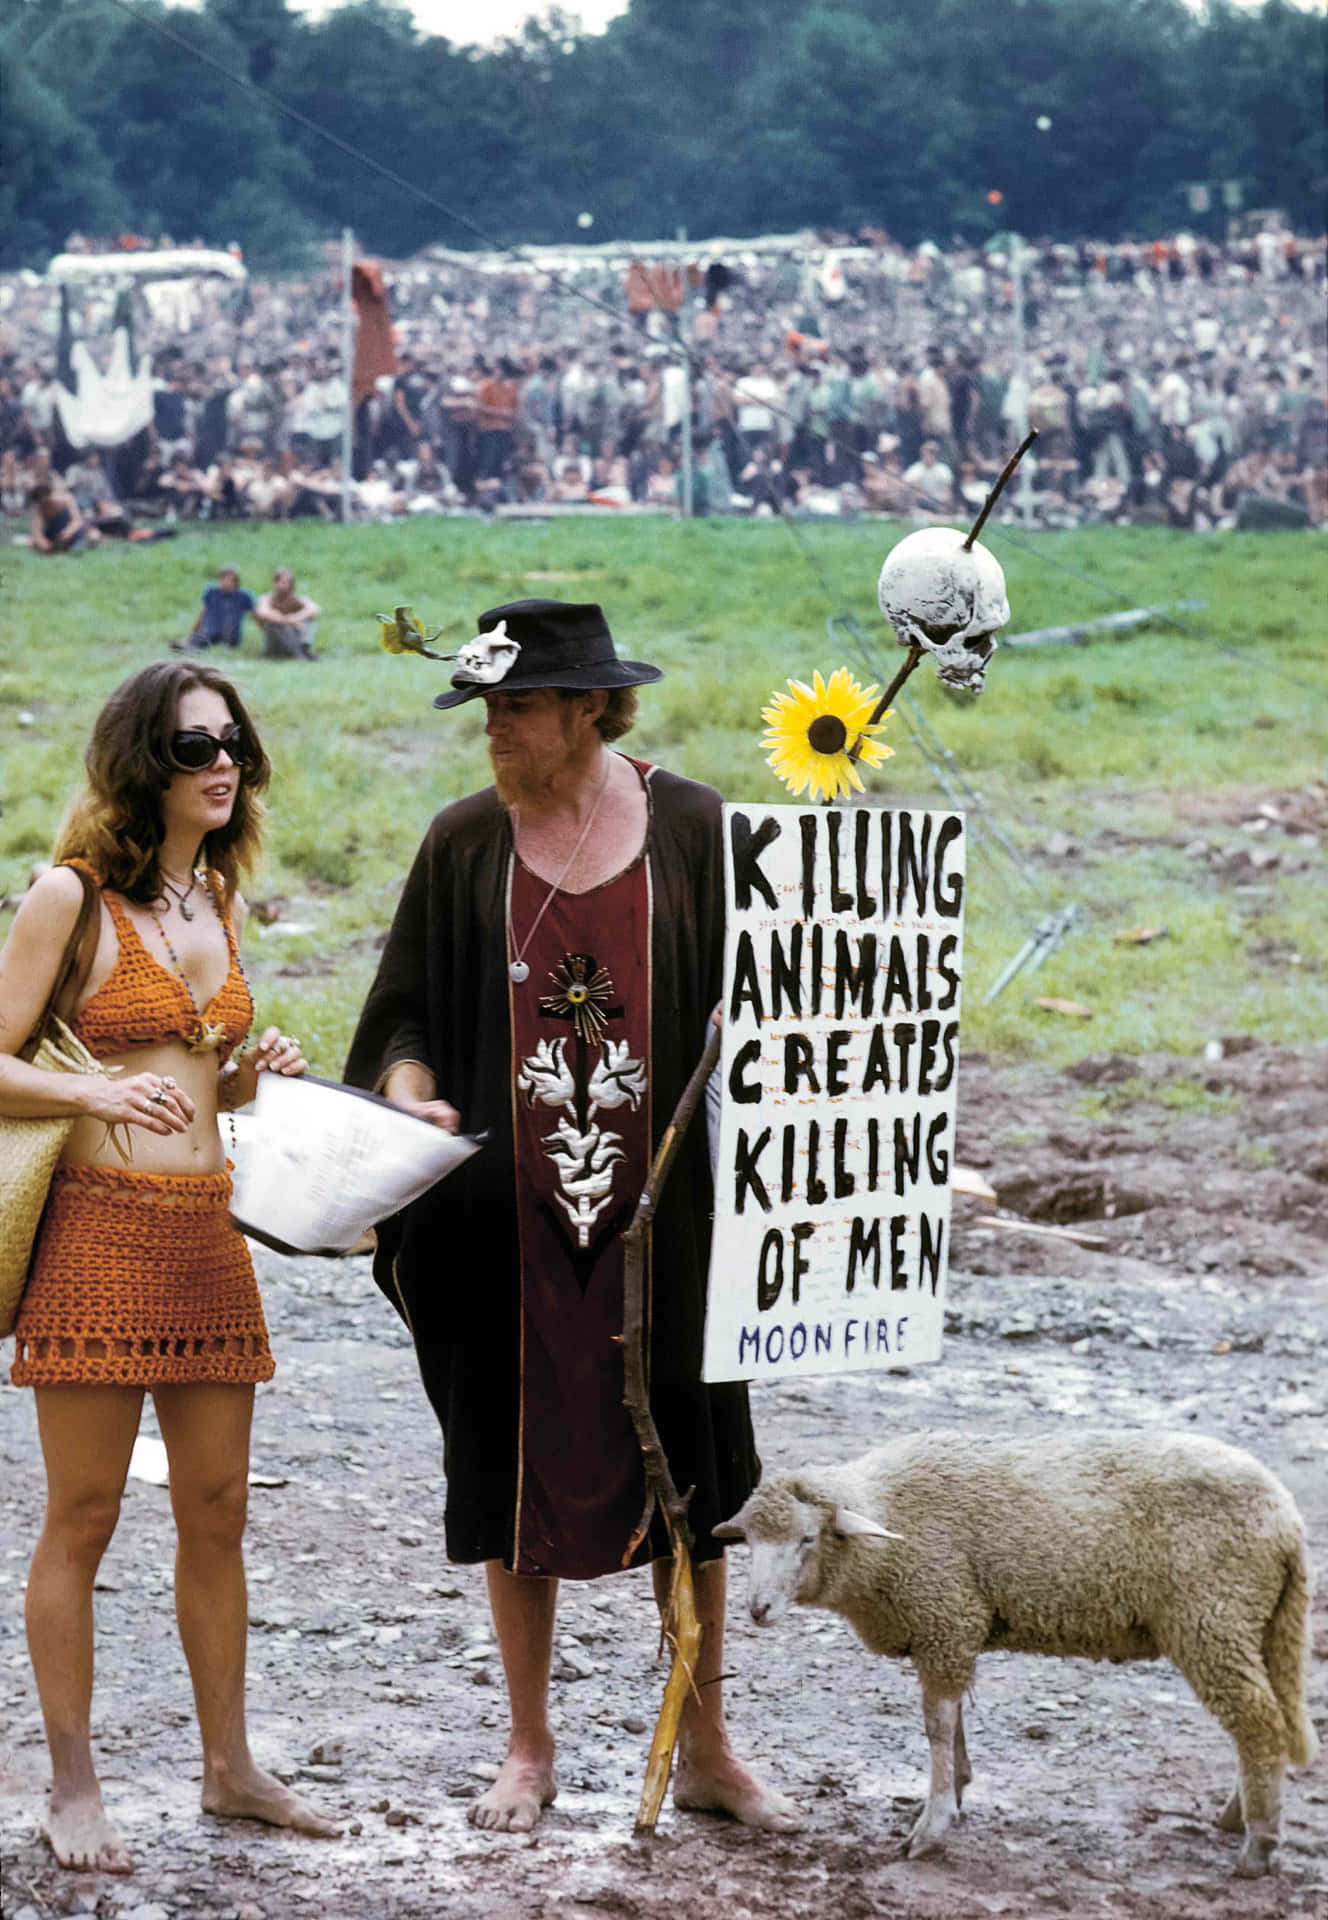 Music, Peace, and Love - The Woodstock Festival of 1969